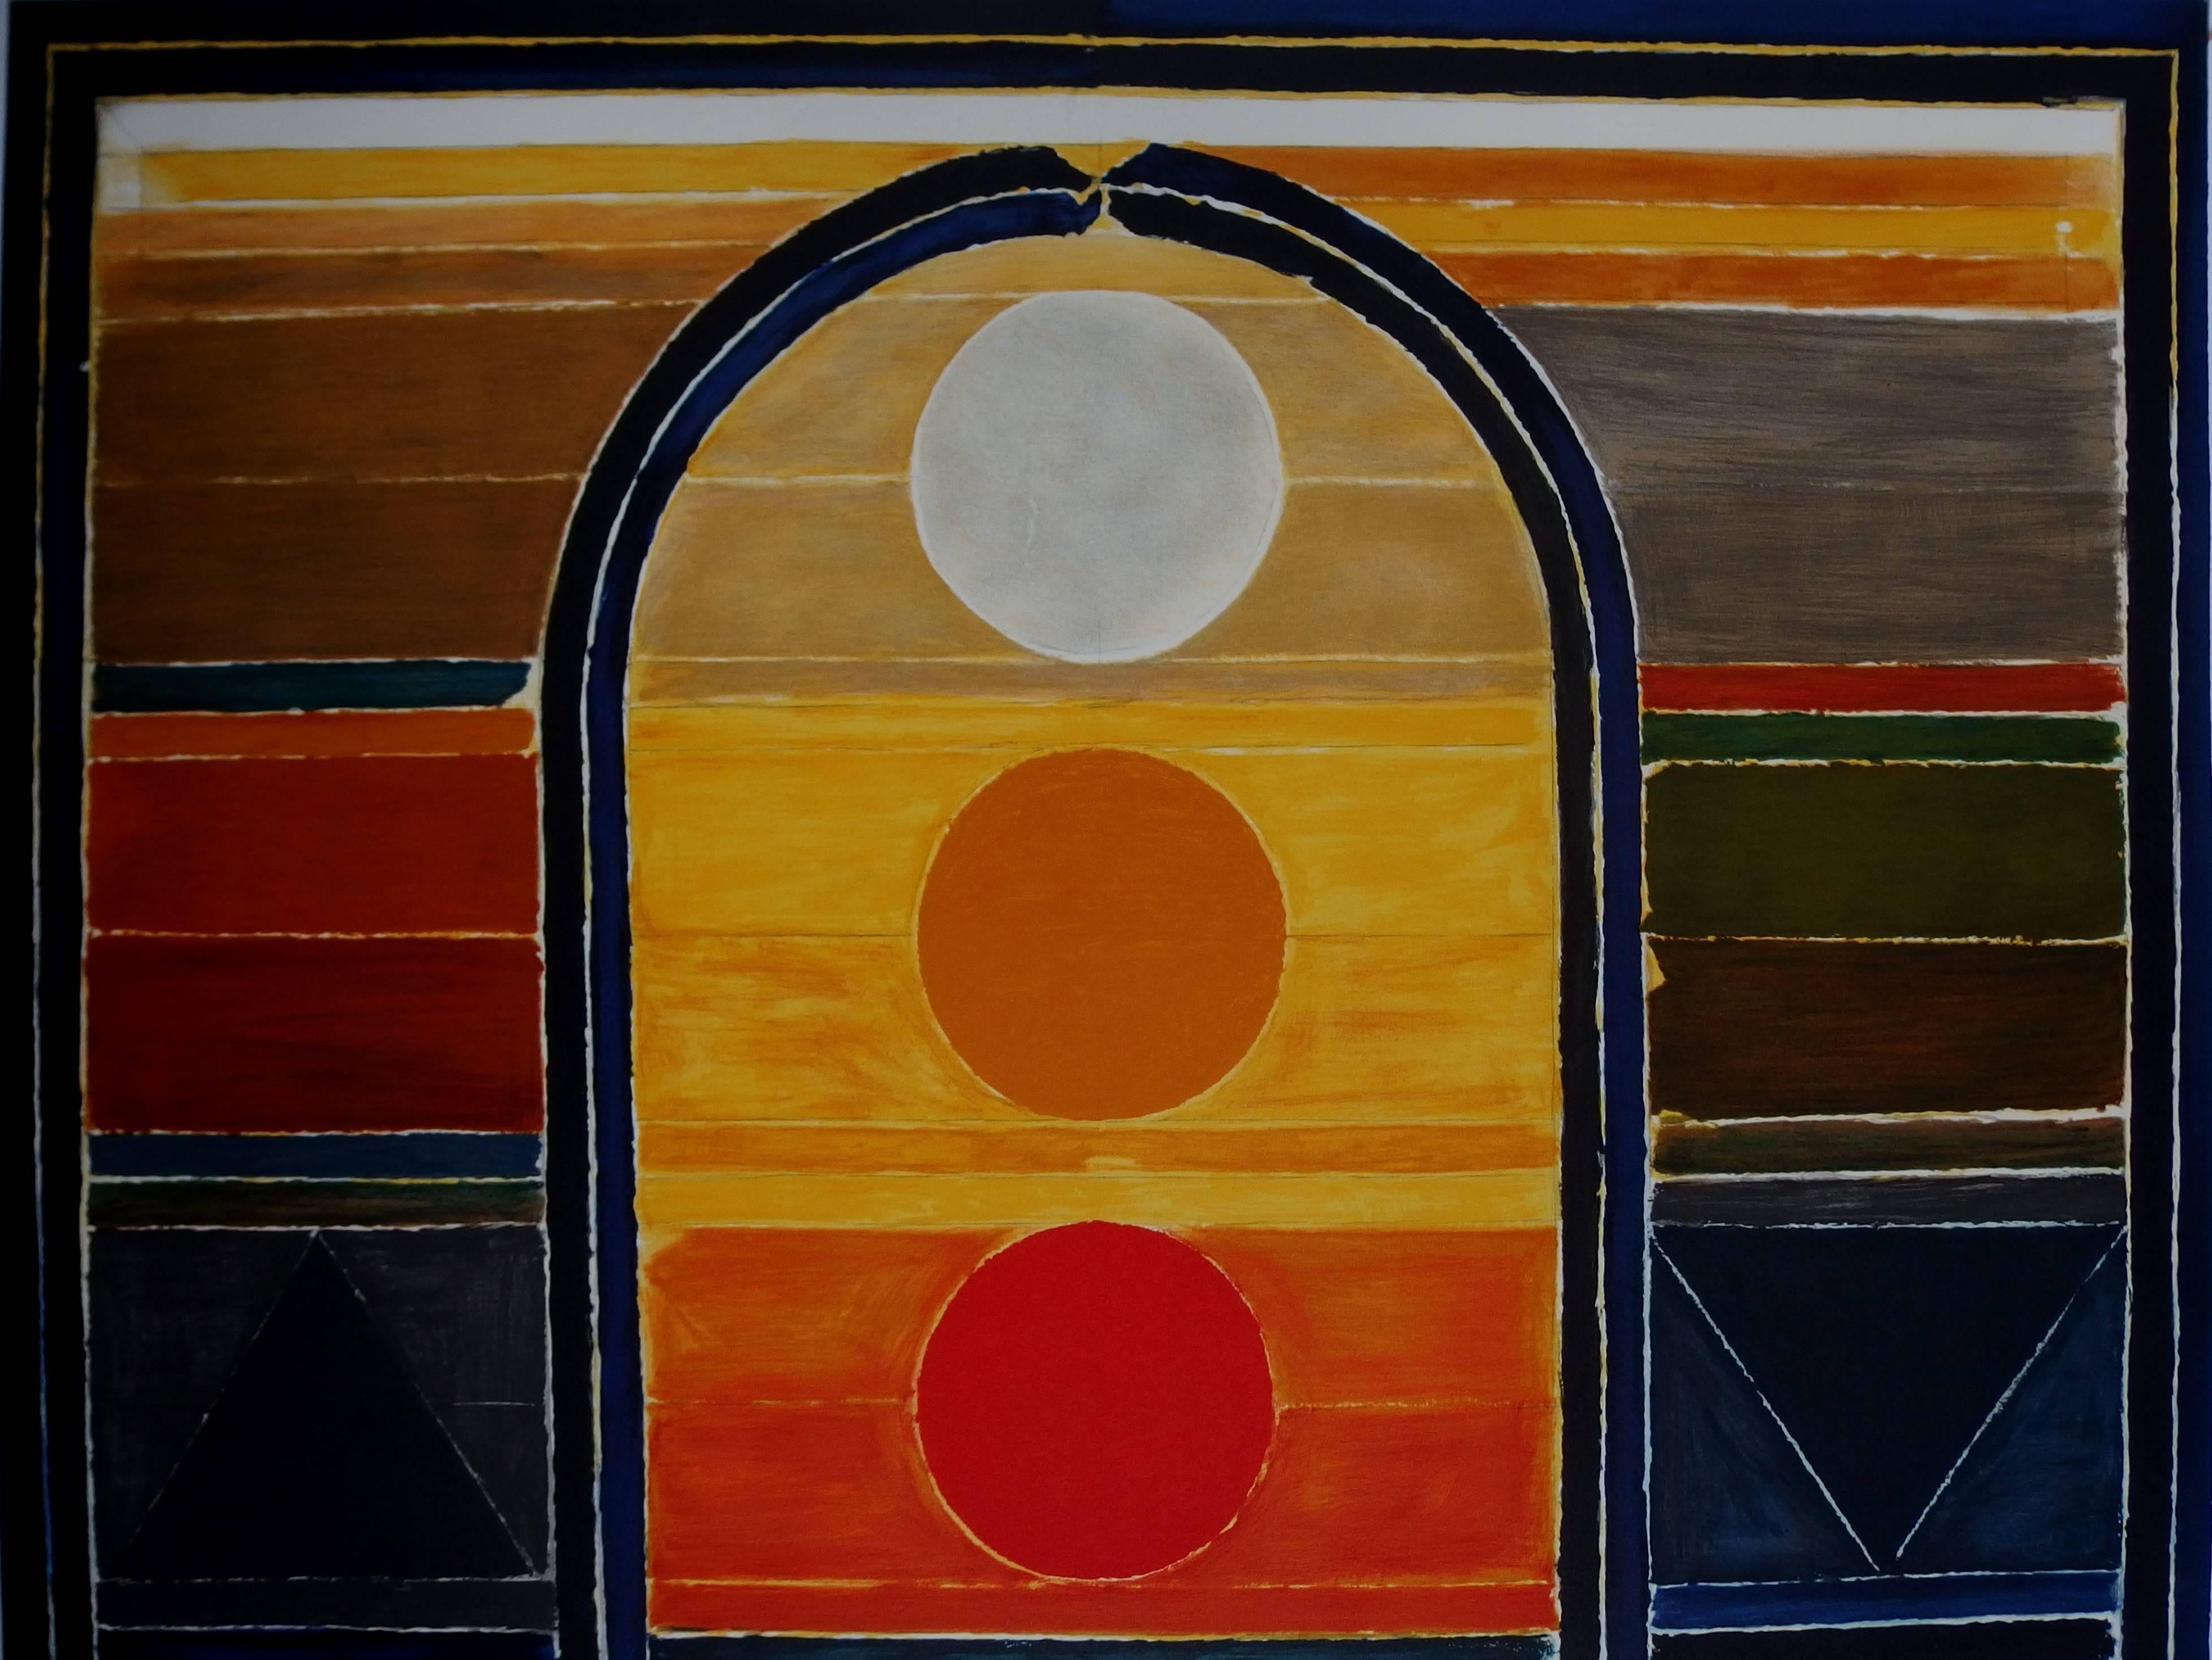 Five elements - Original handsigned lithograph - 150 copies - Abstract Expressionist Print by Sayed Haider Raza